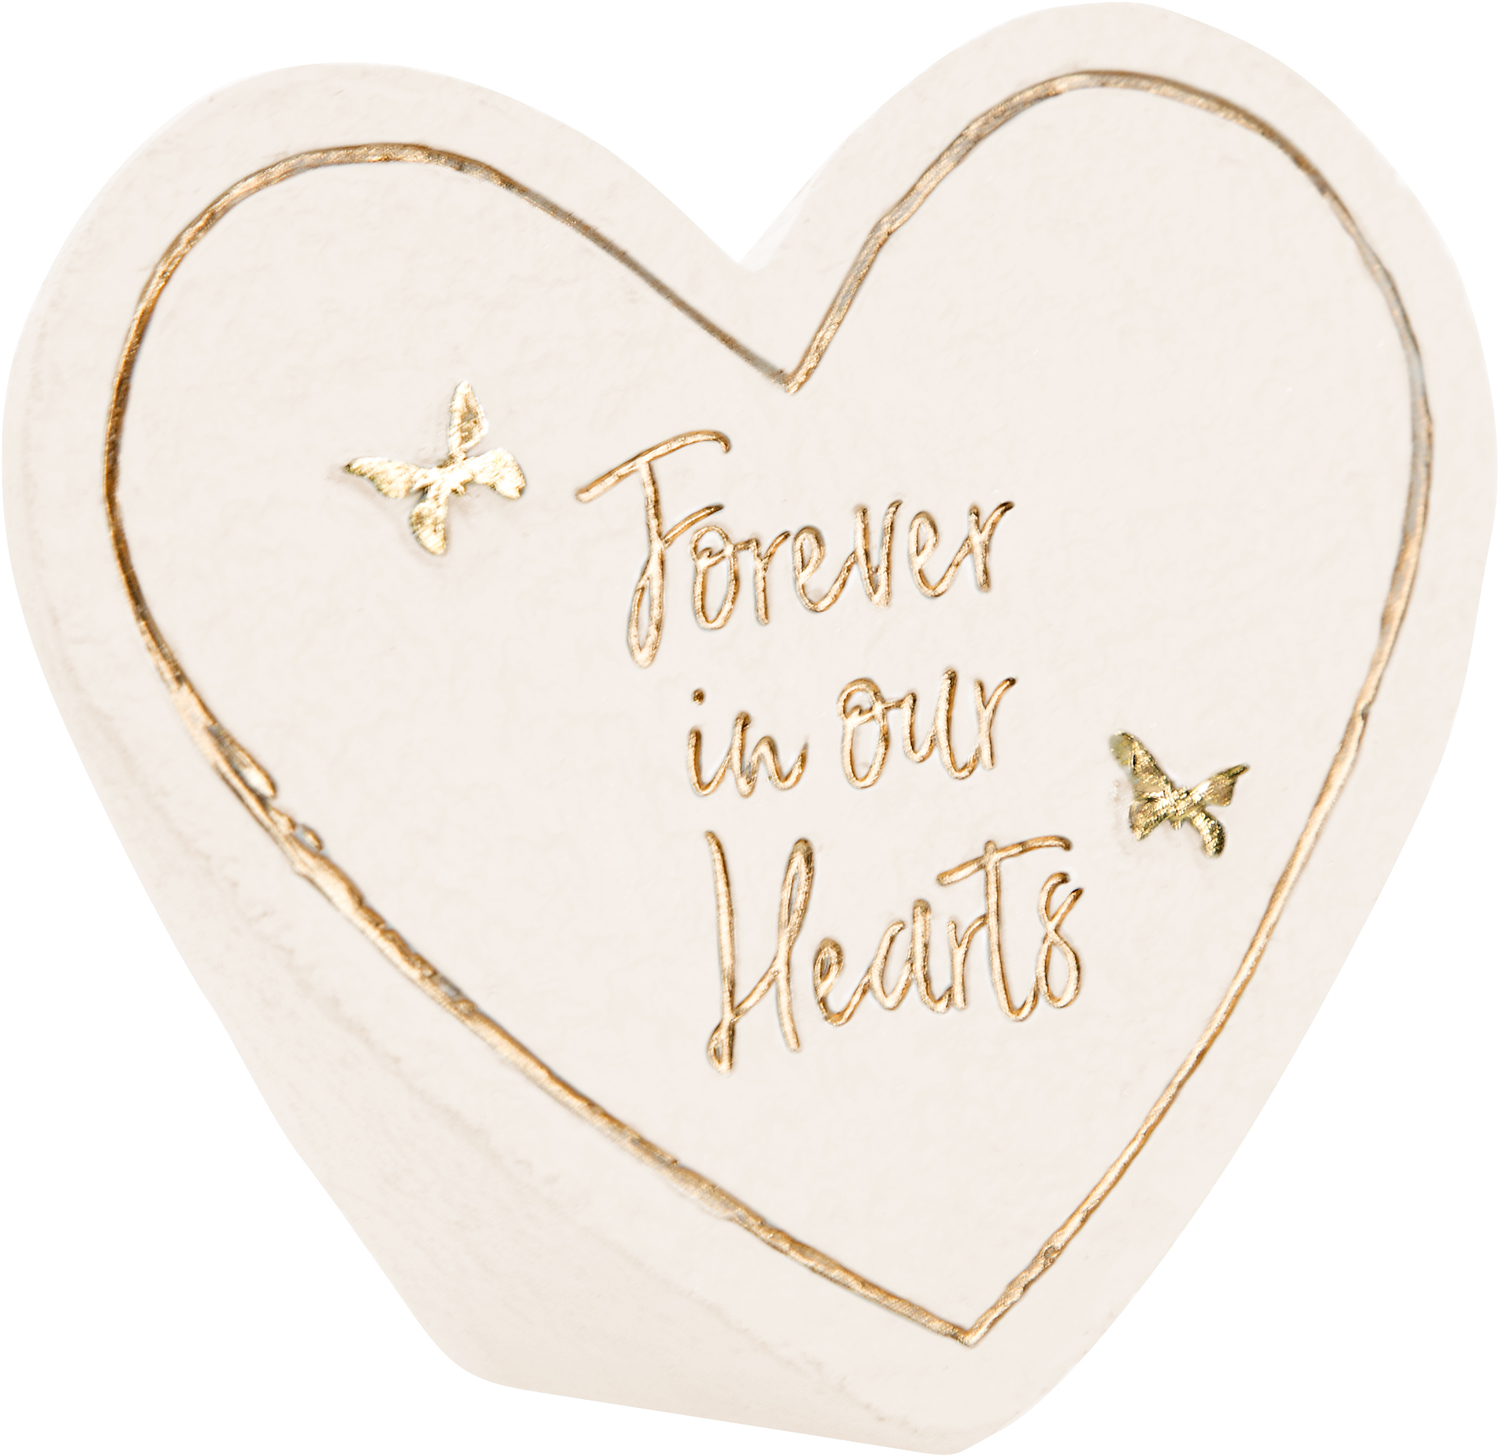 Forever by Forever in our Hearts - Forever - 3.5" x 3" Heart Memorial Stone